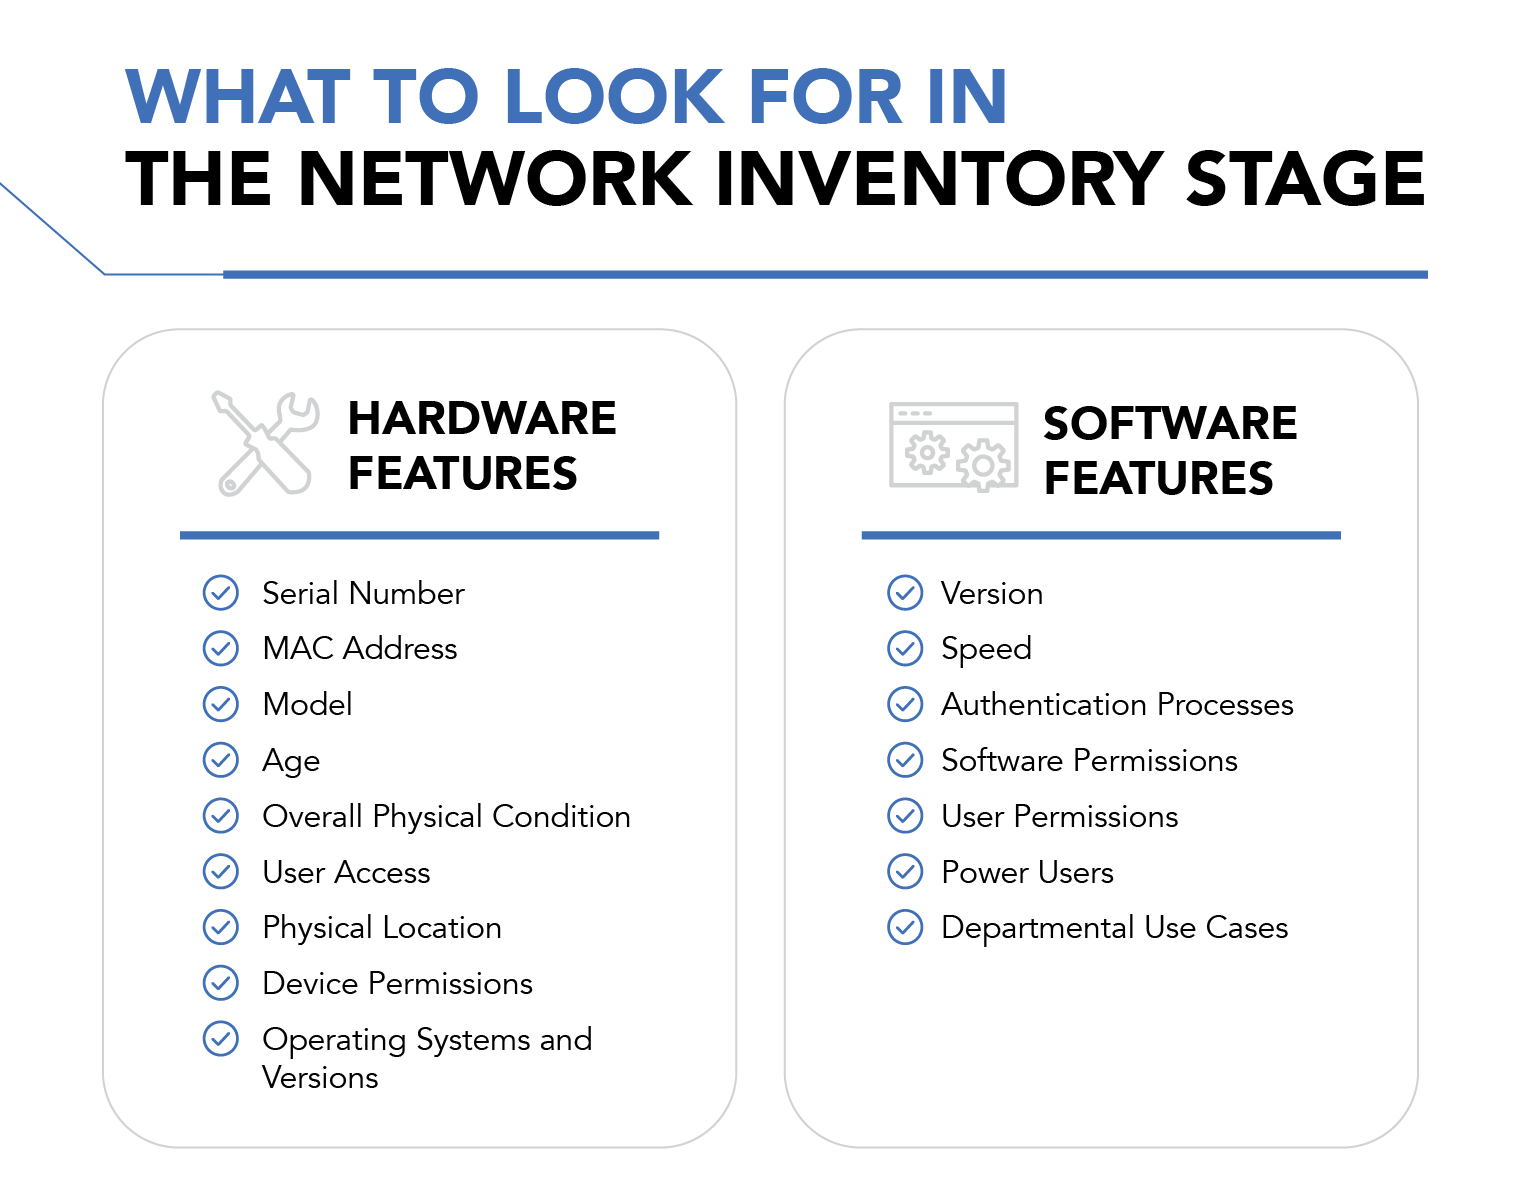 What to look for in the network inventory stage.